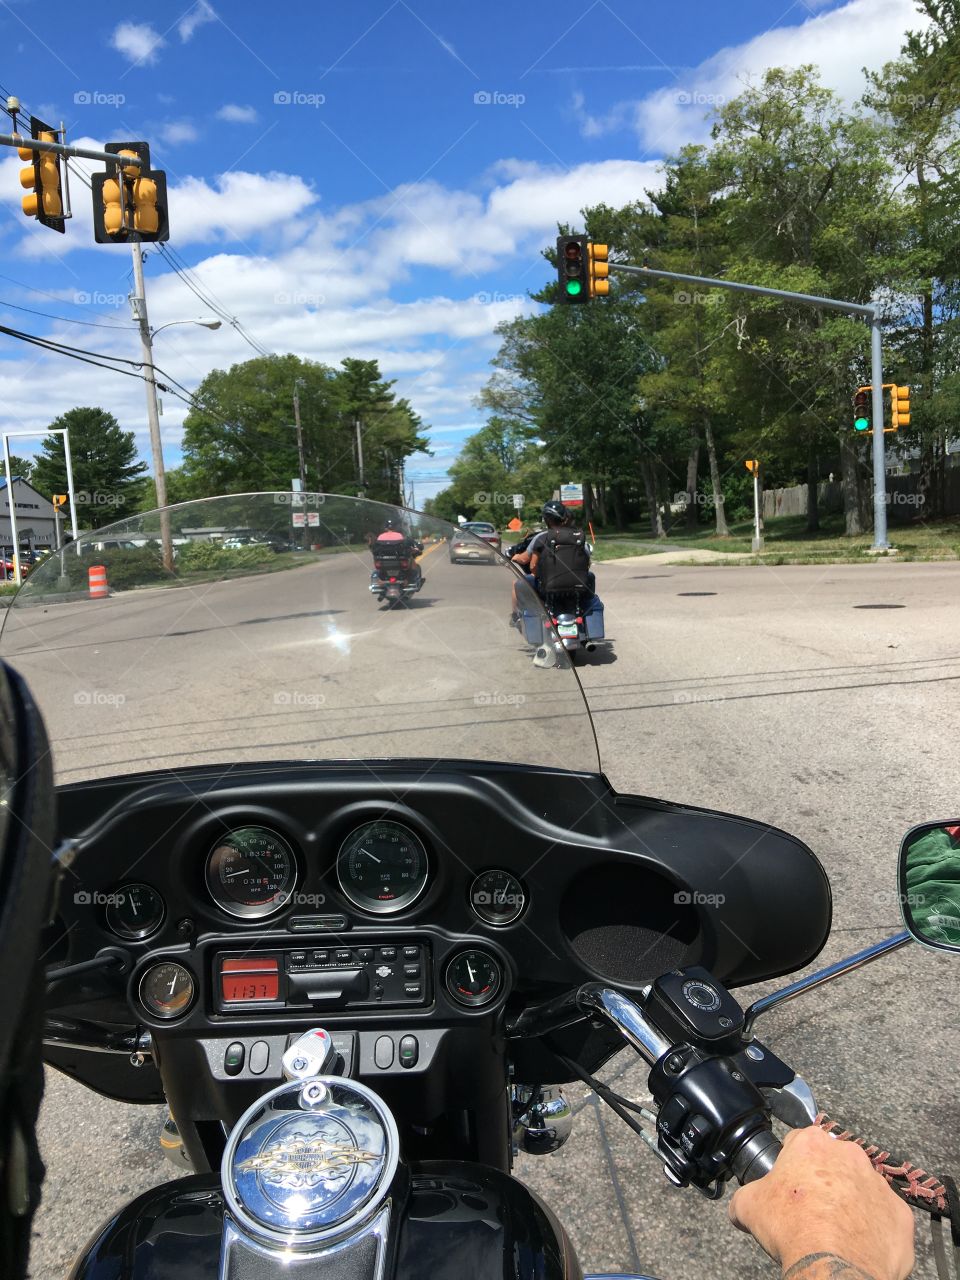 Riding Motorcycles with friends traveling! Pic taken from back seat😎